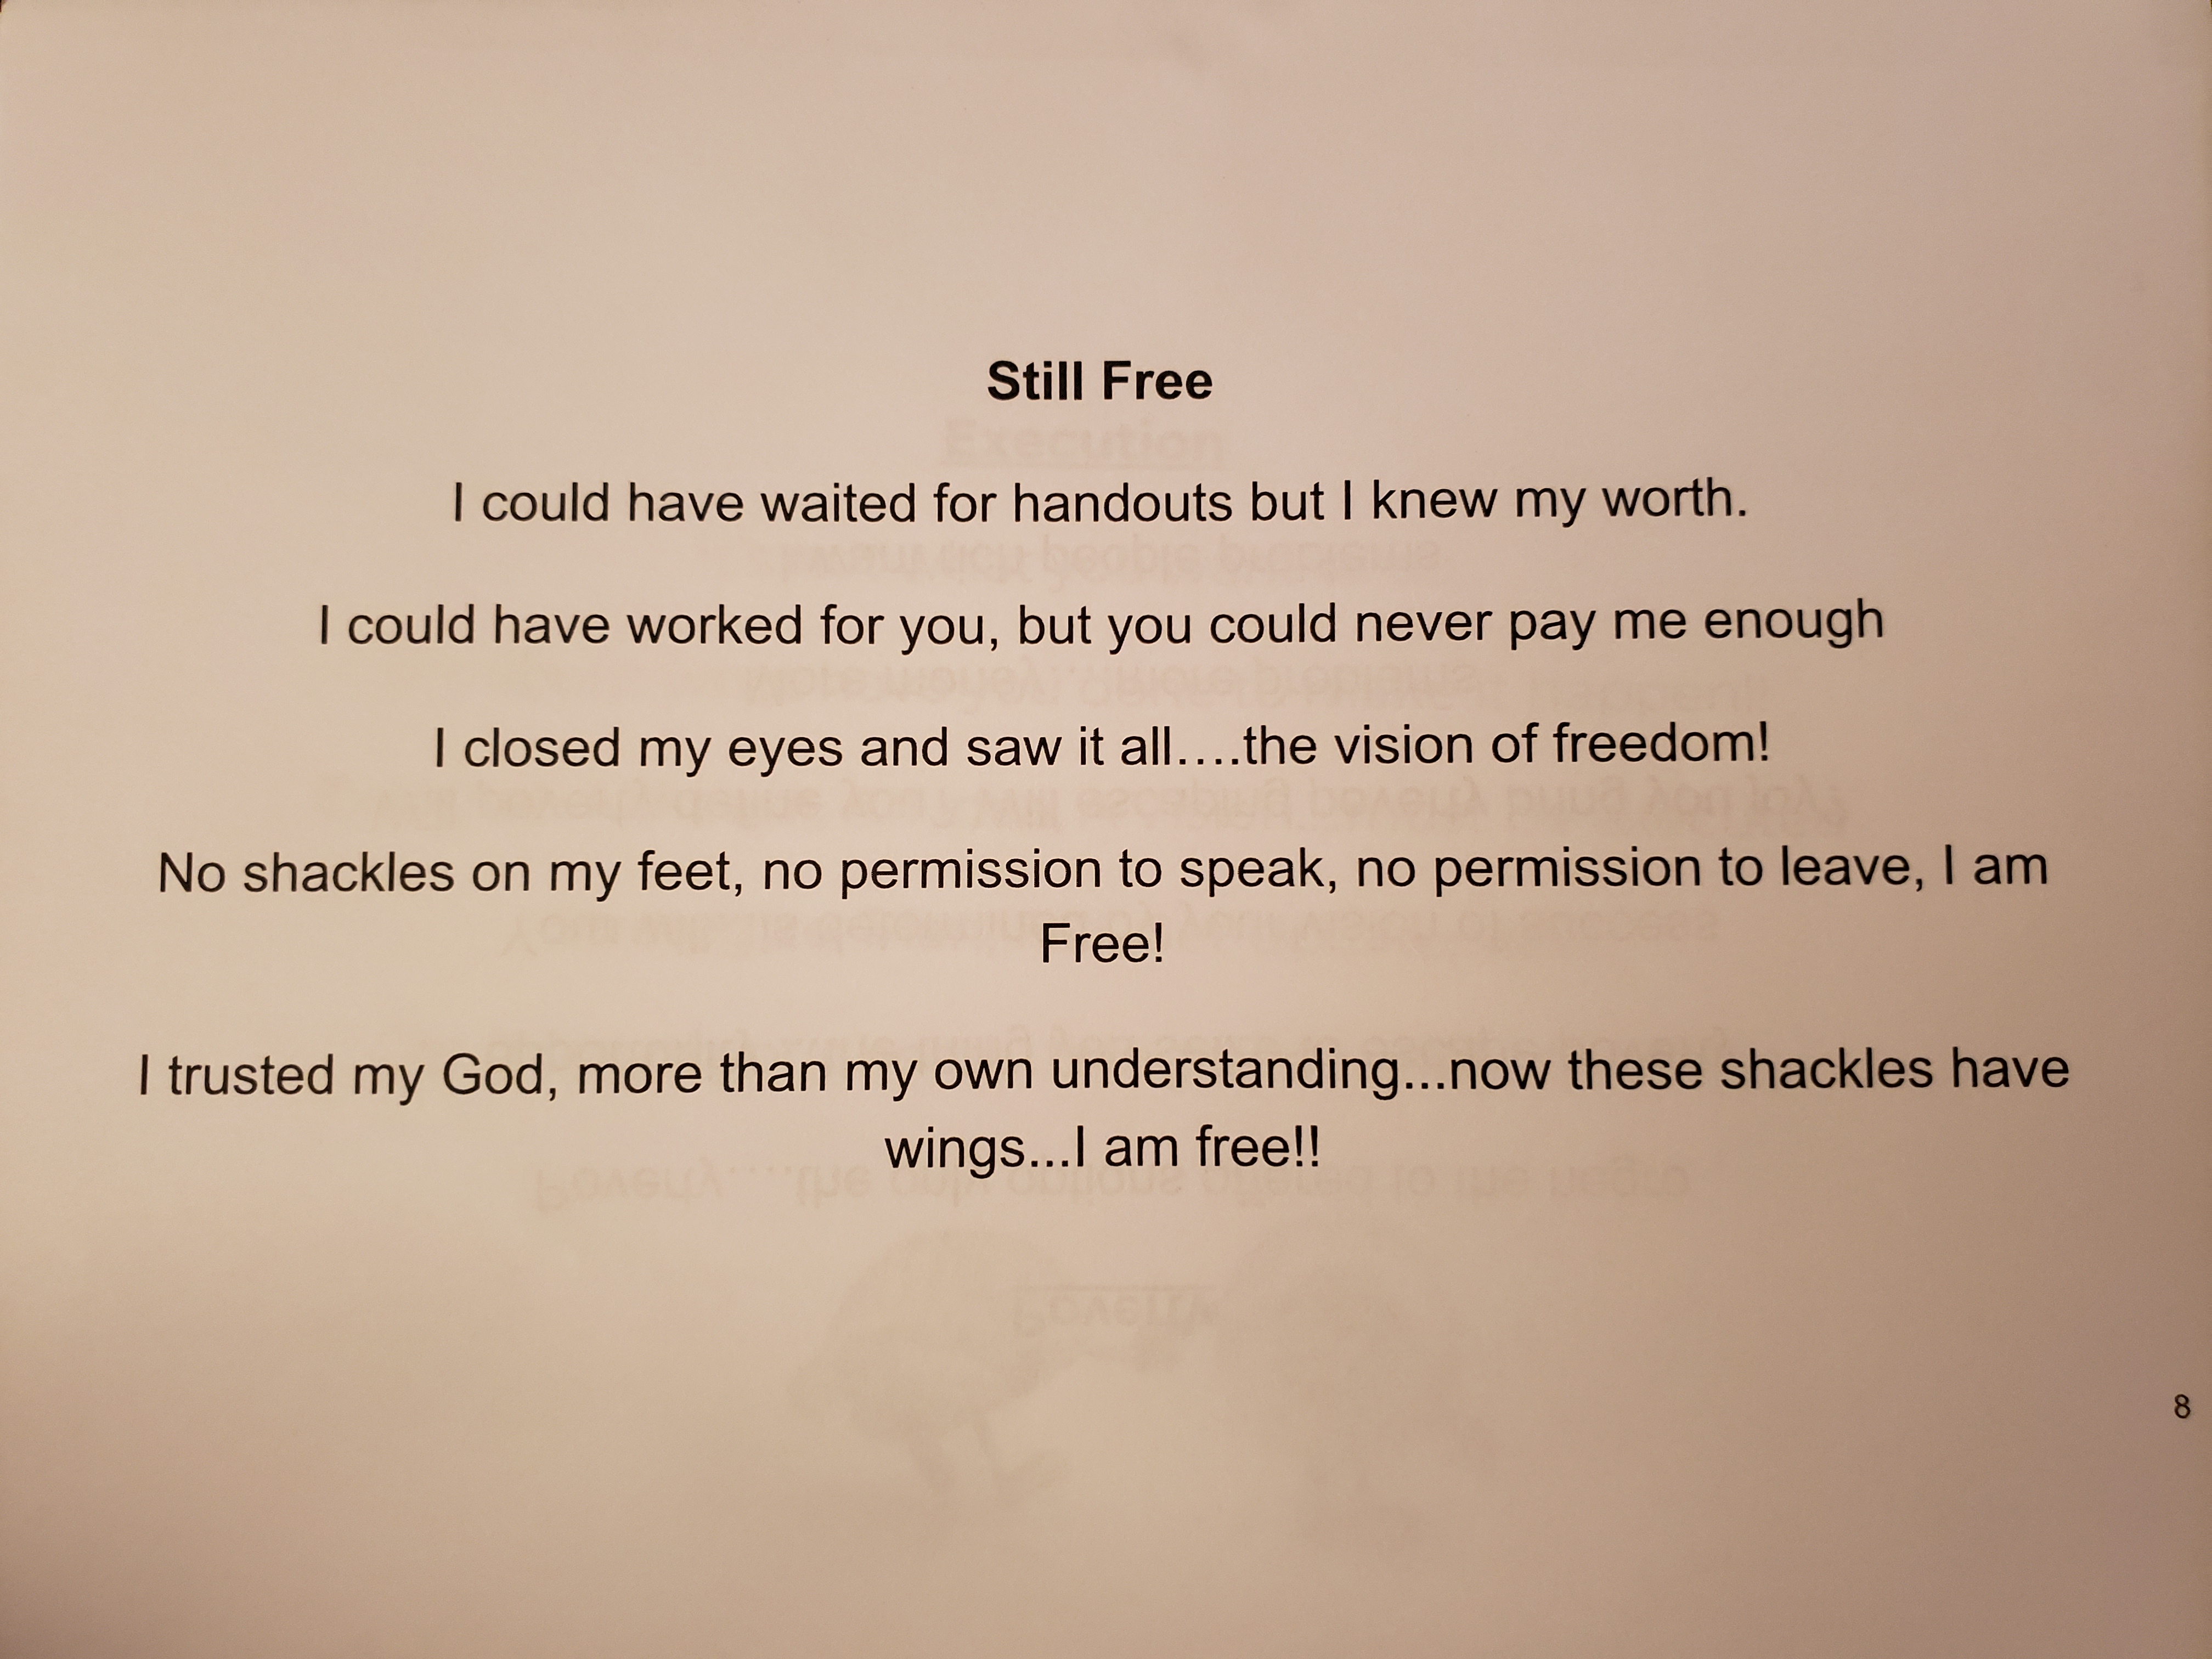 A reminder that your still free...hold on to that vision!